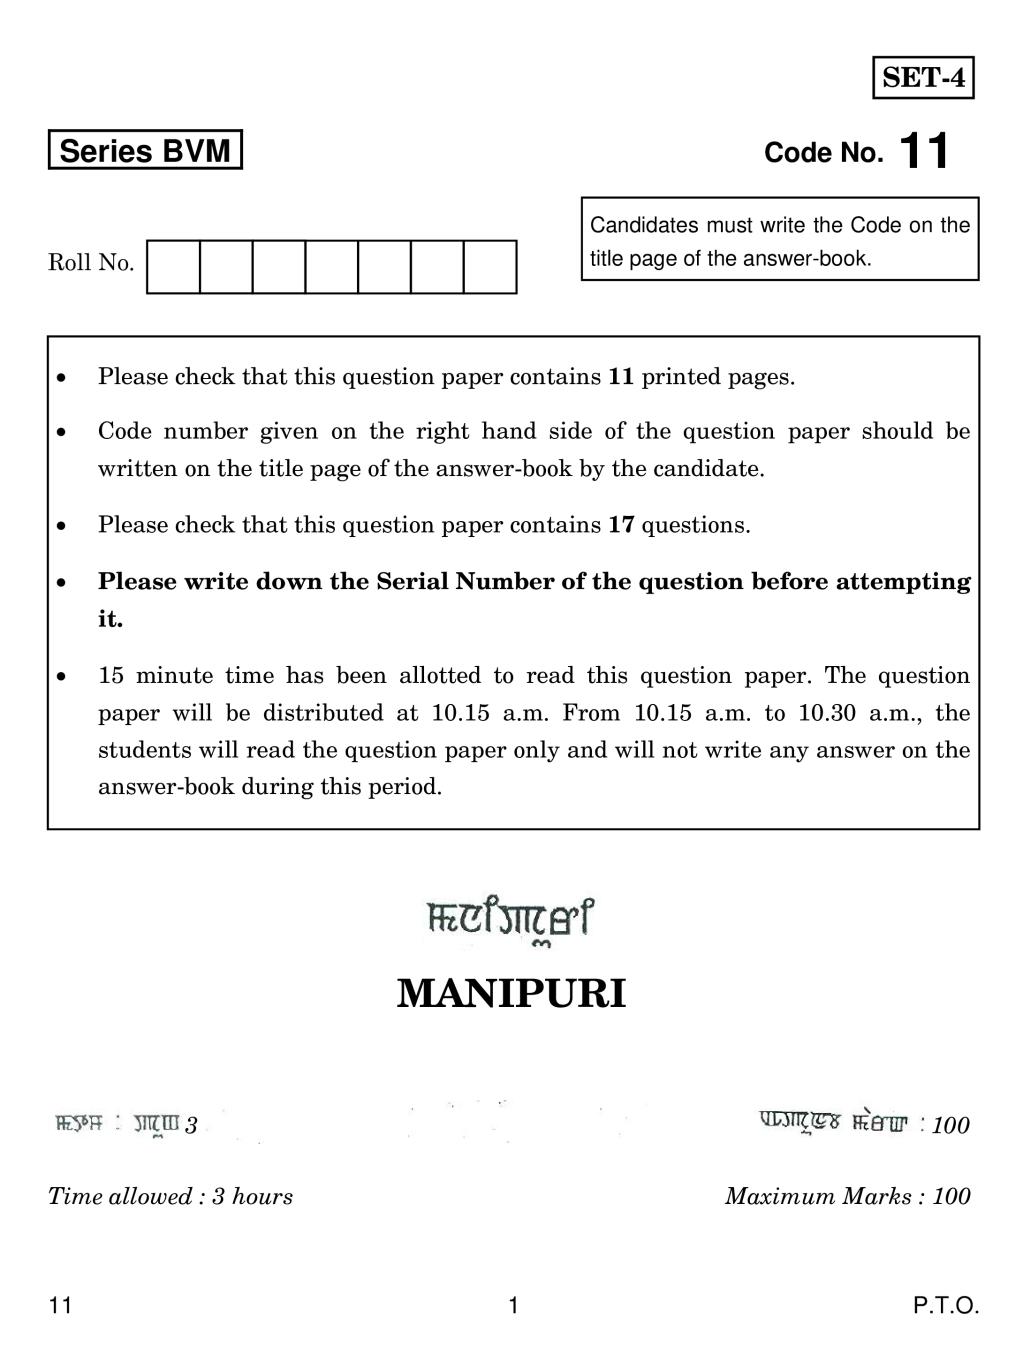 CBSE Class 12 Manipuri Question Paper 2019 - Page 1